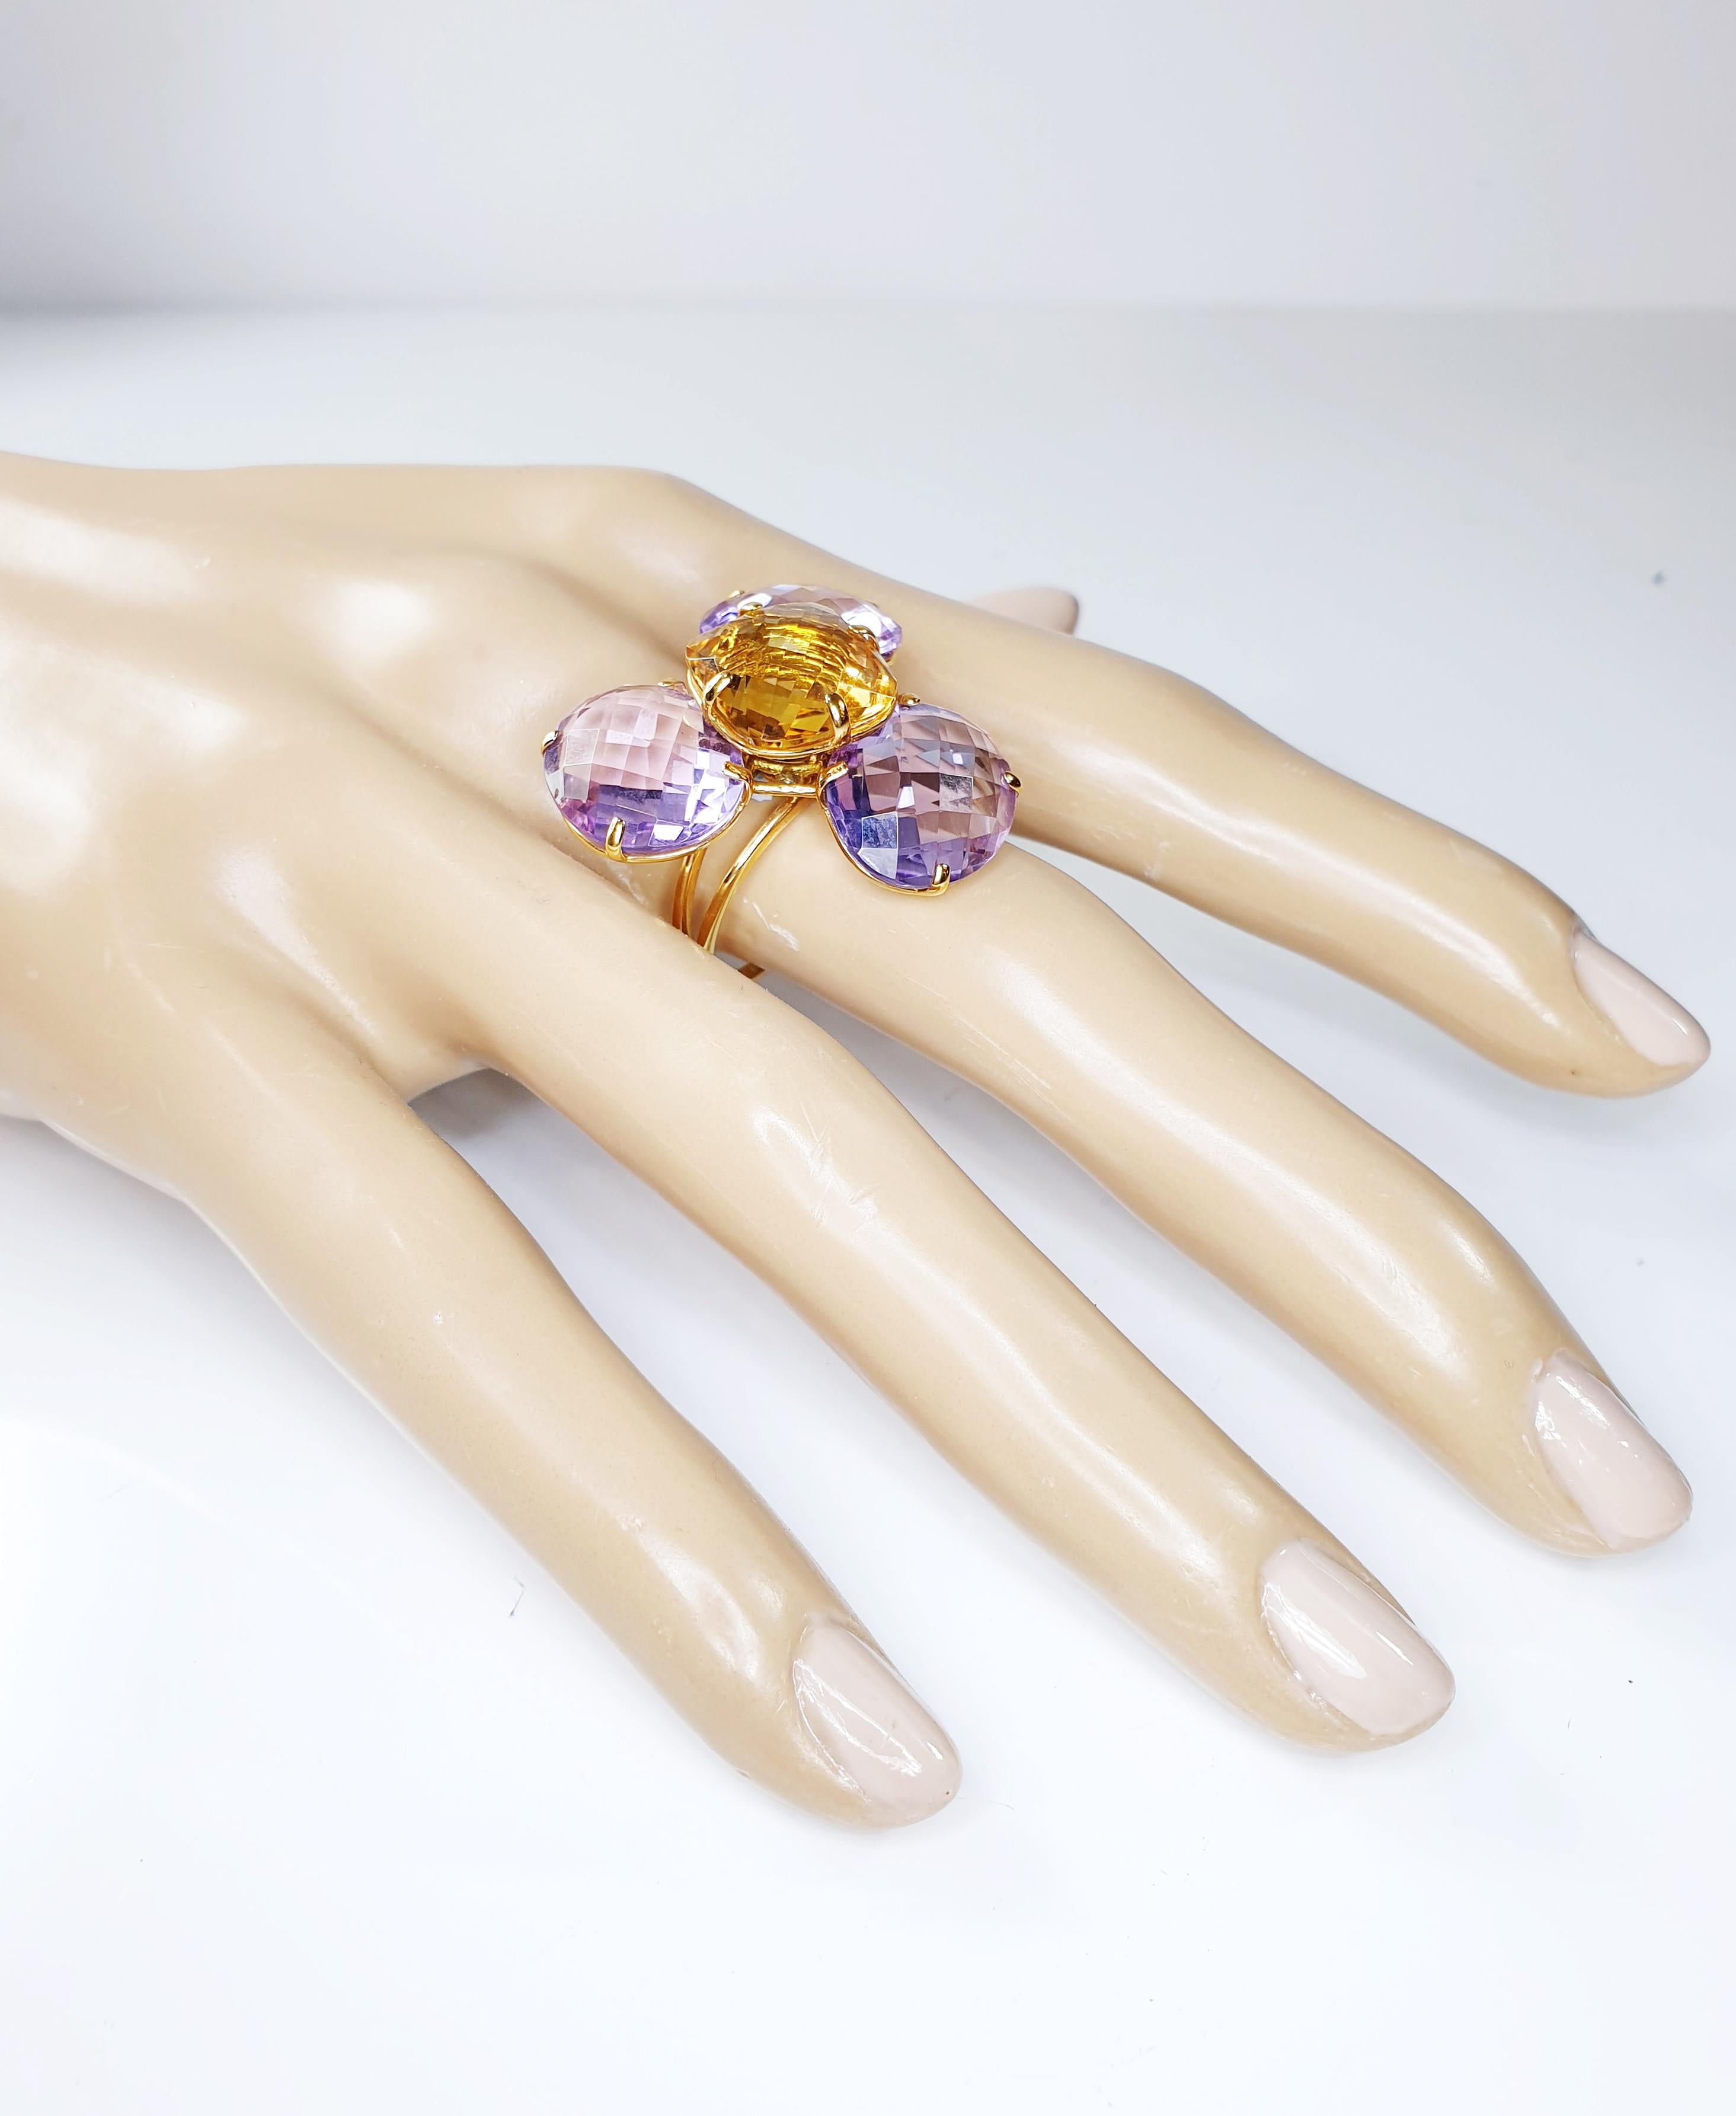 Multiphaceted Flower Ring with Central Citrine and Three Amethysts For Sale 3